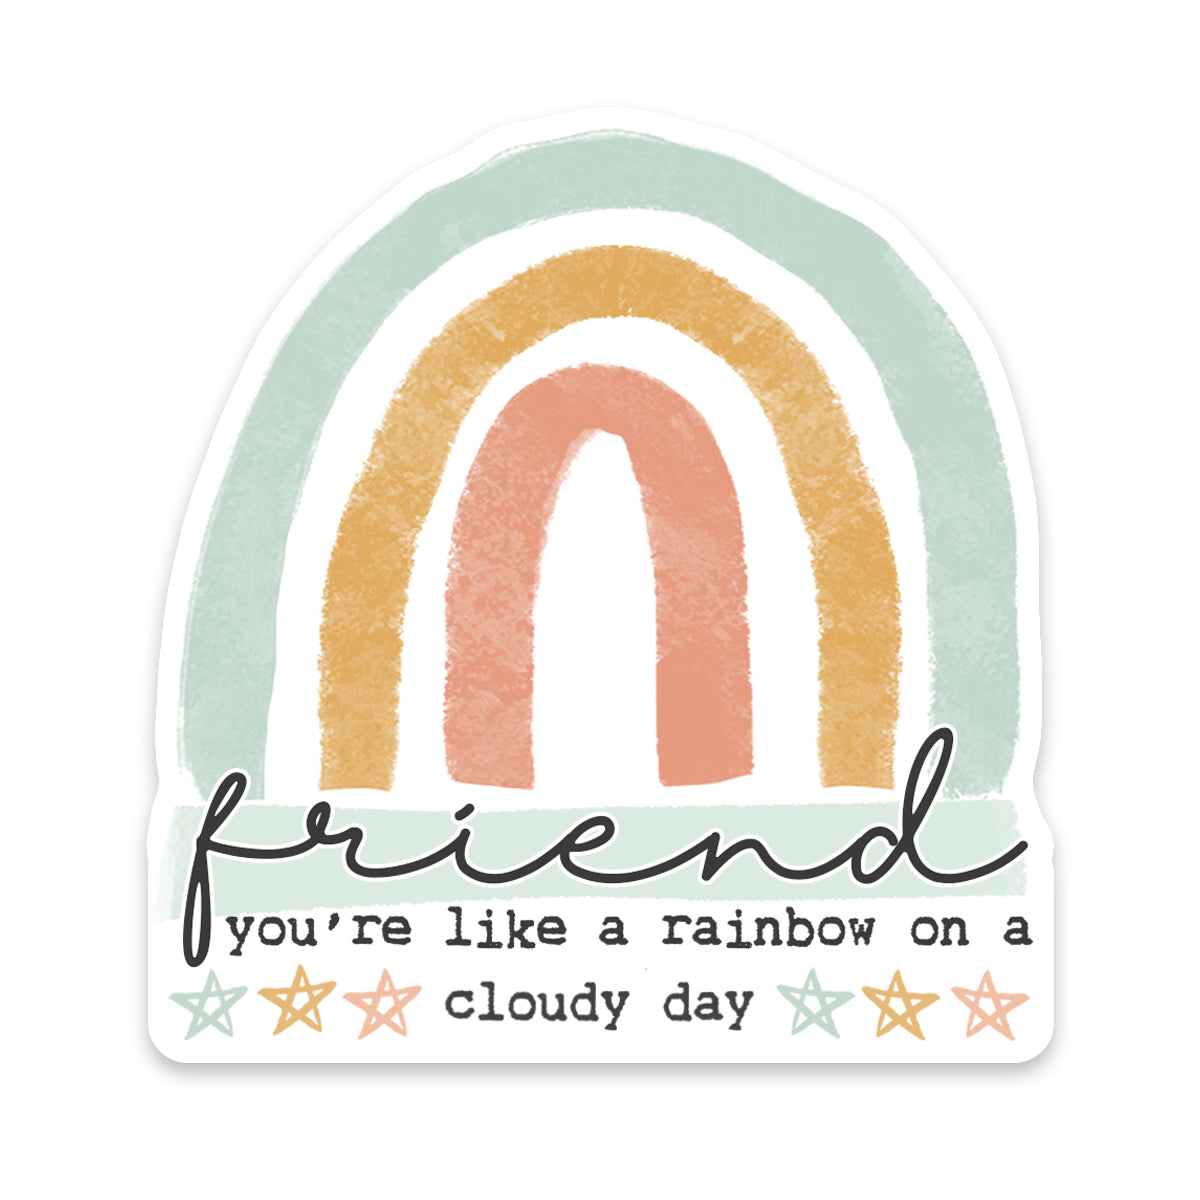 Friend You're Like A Rainbow On A Cloudy Day Sticker